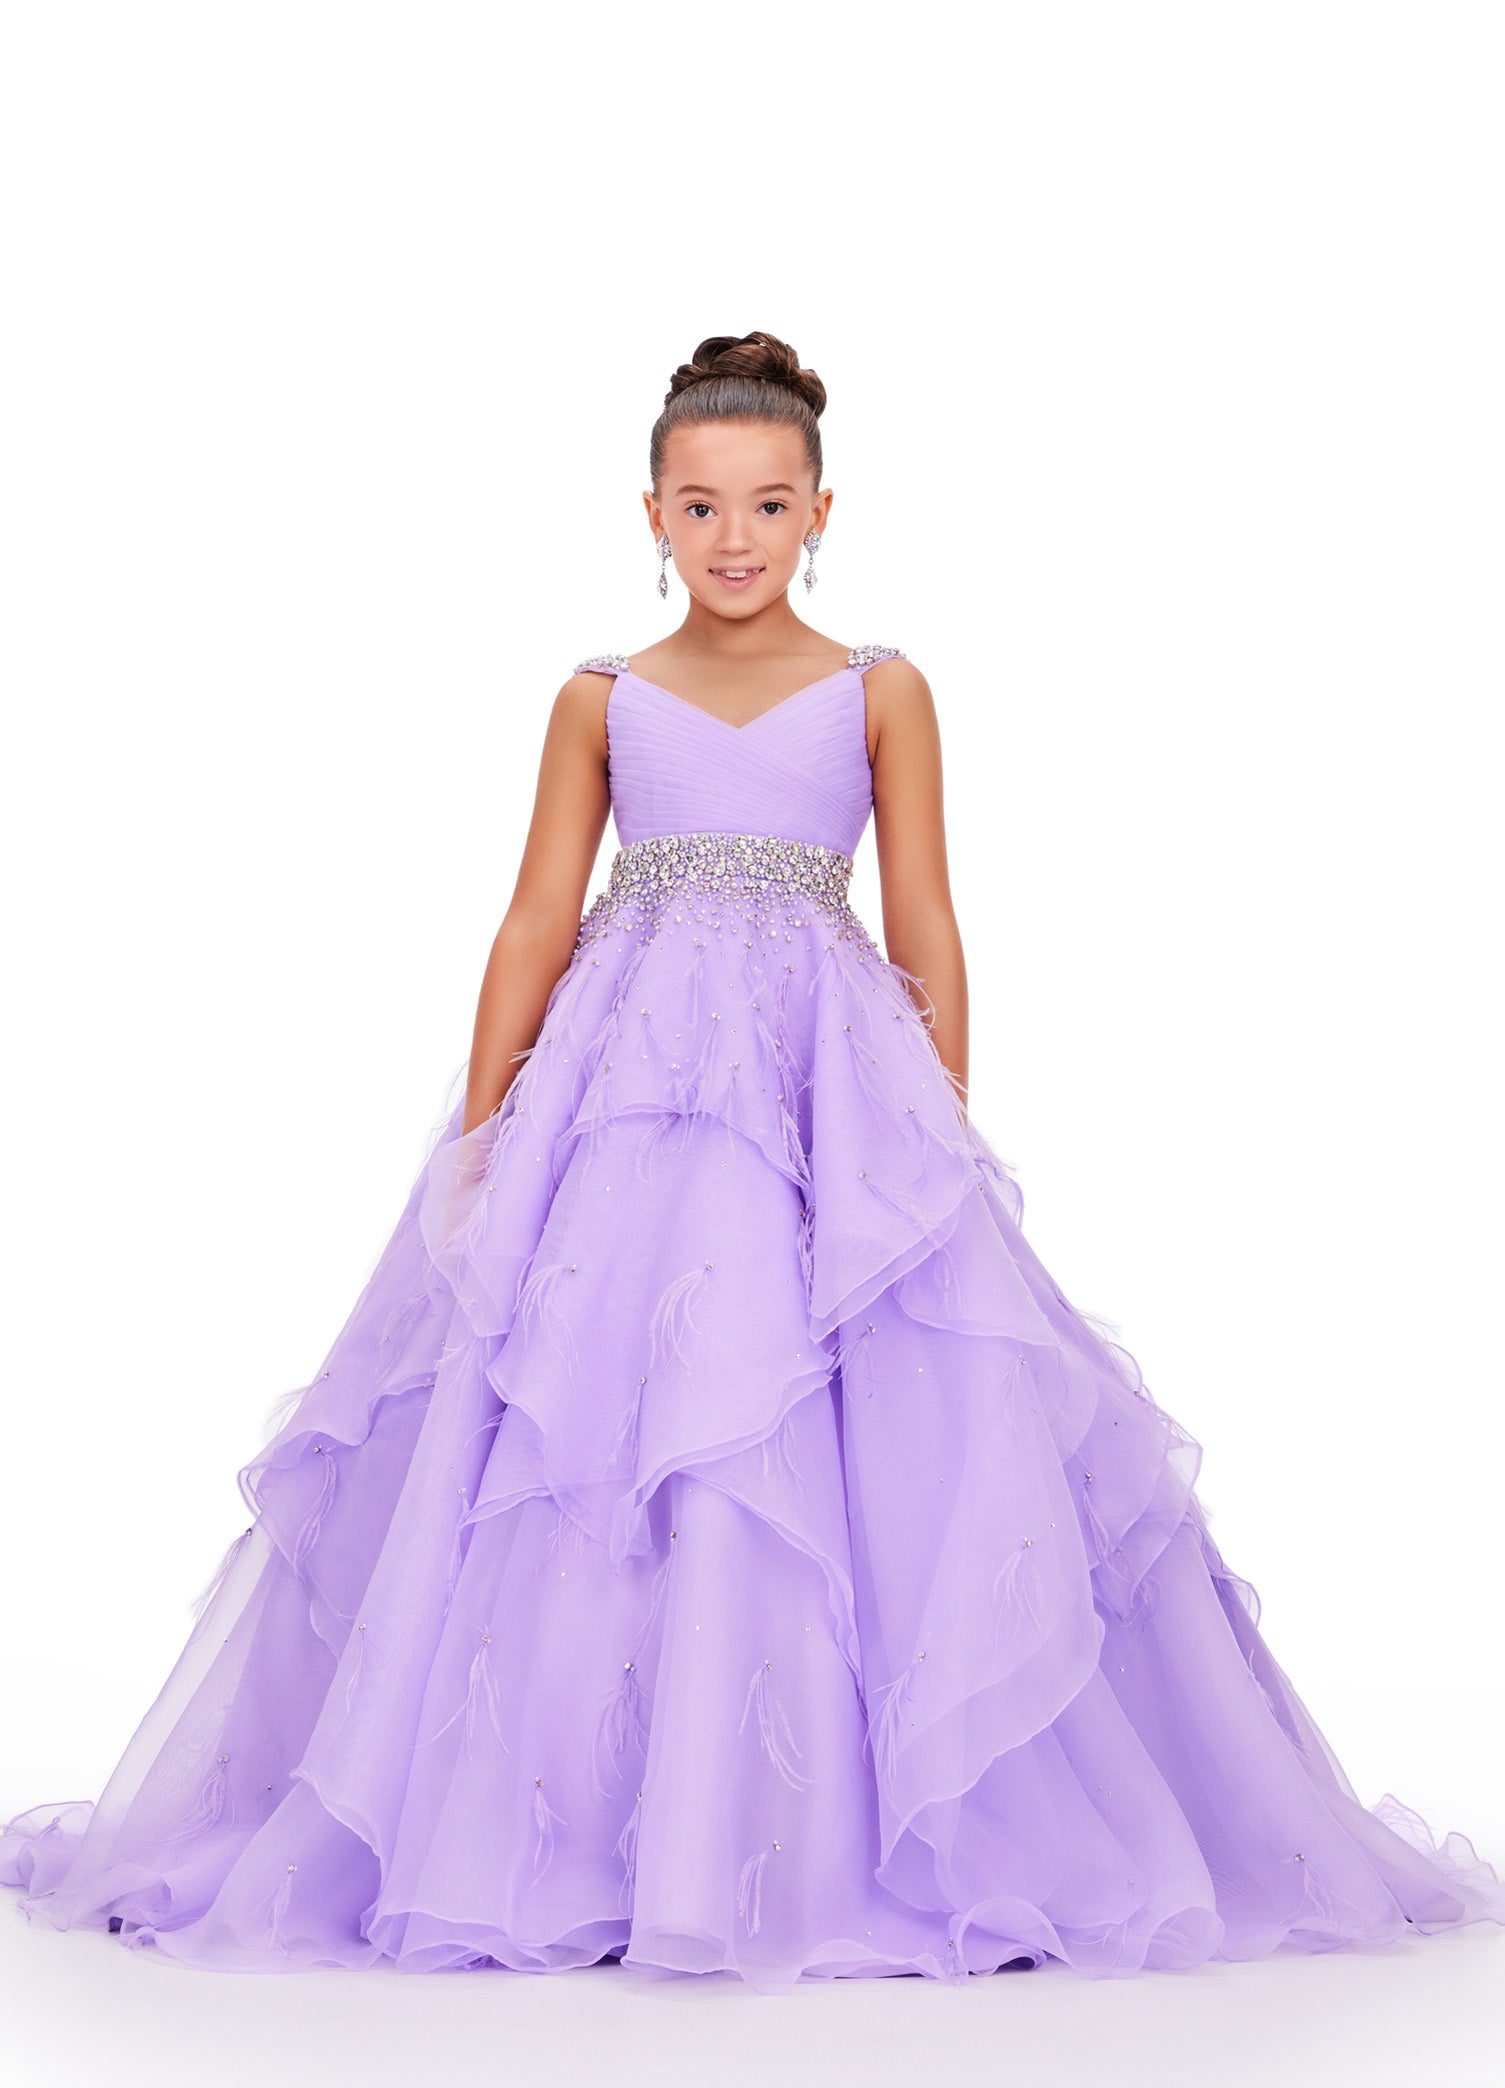 Kids Rama Net Long Gown For Girls - EVERWILLOW - 3893676